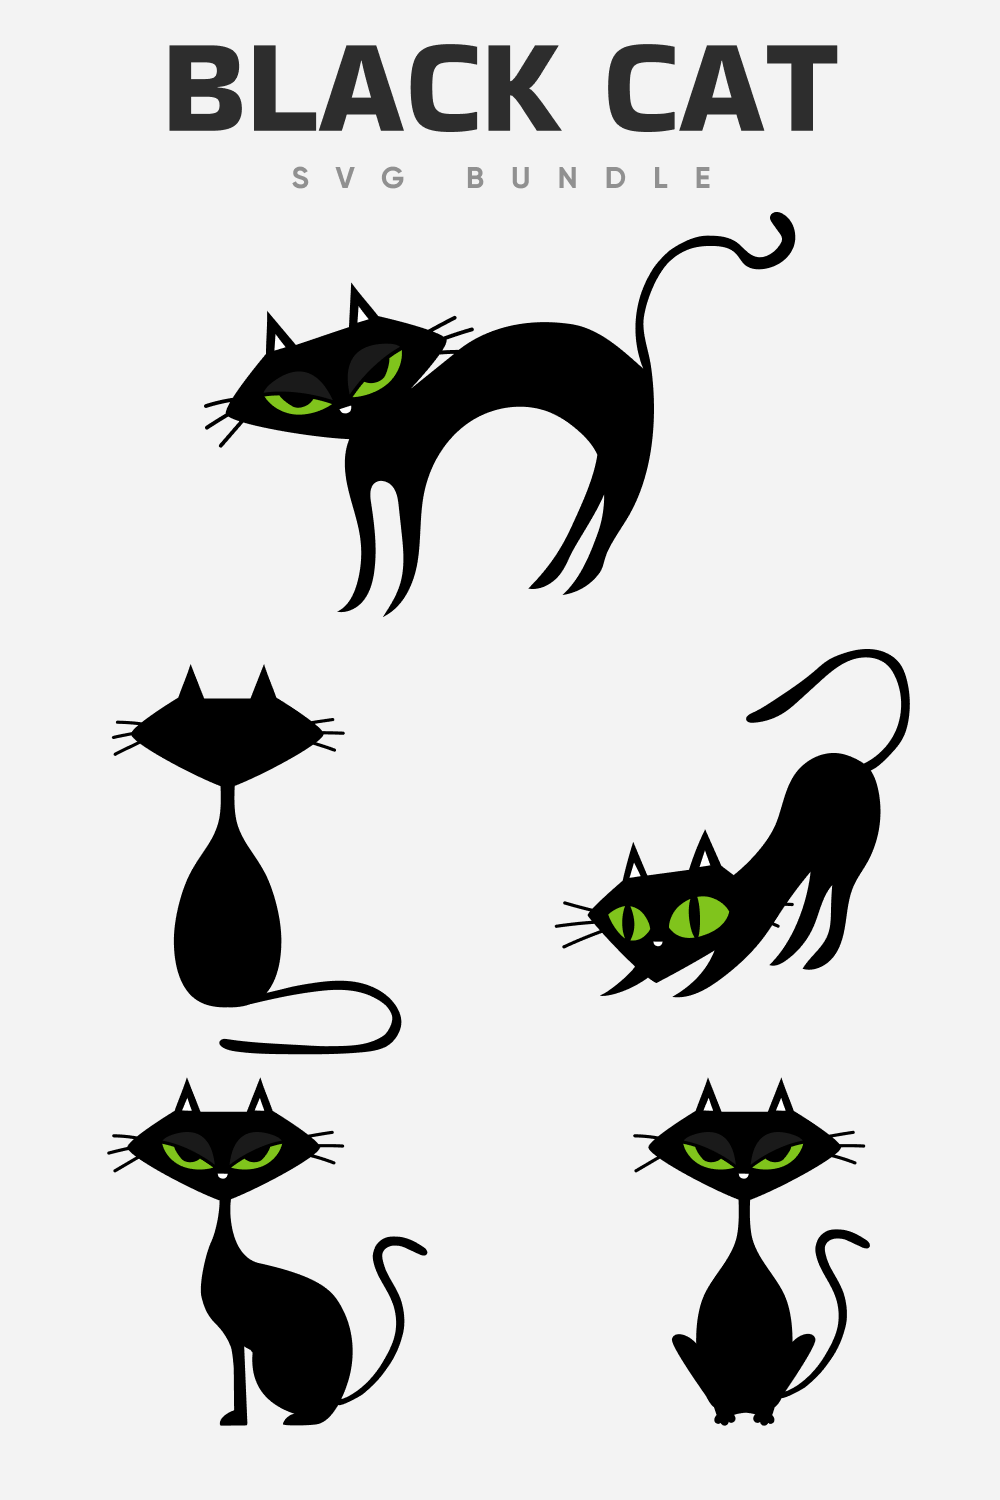 Black cat with green eyes in different mood.